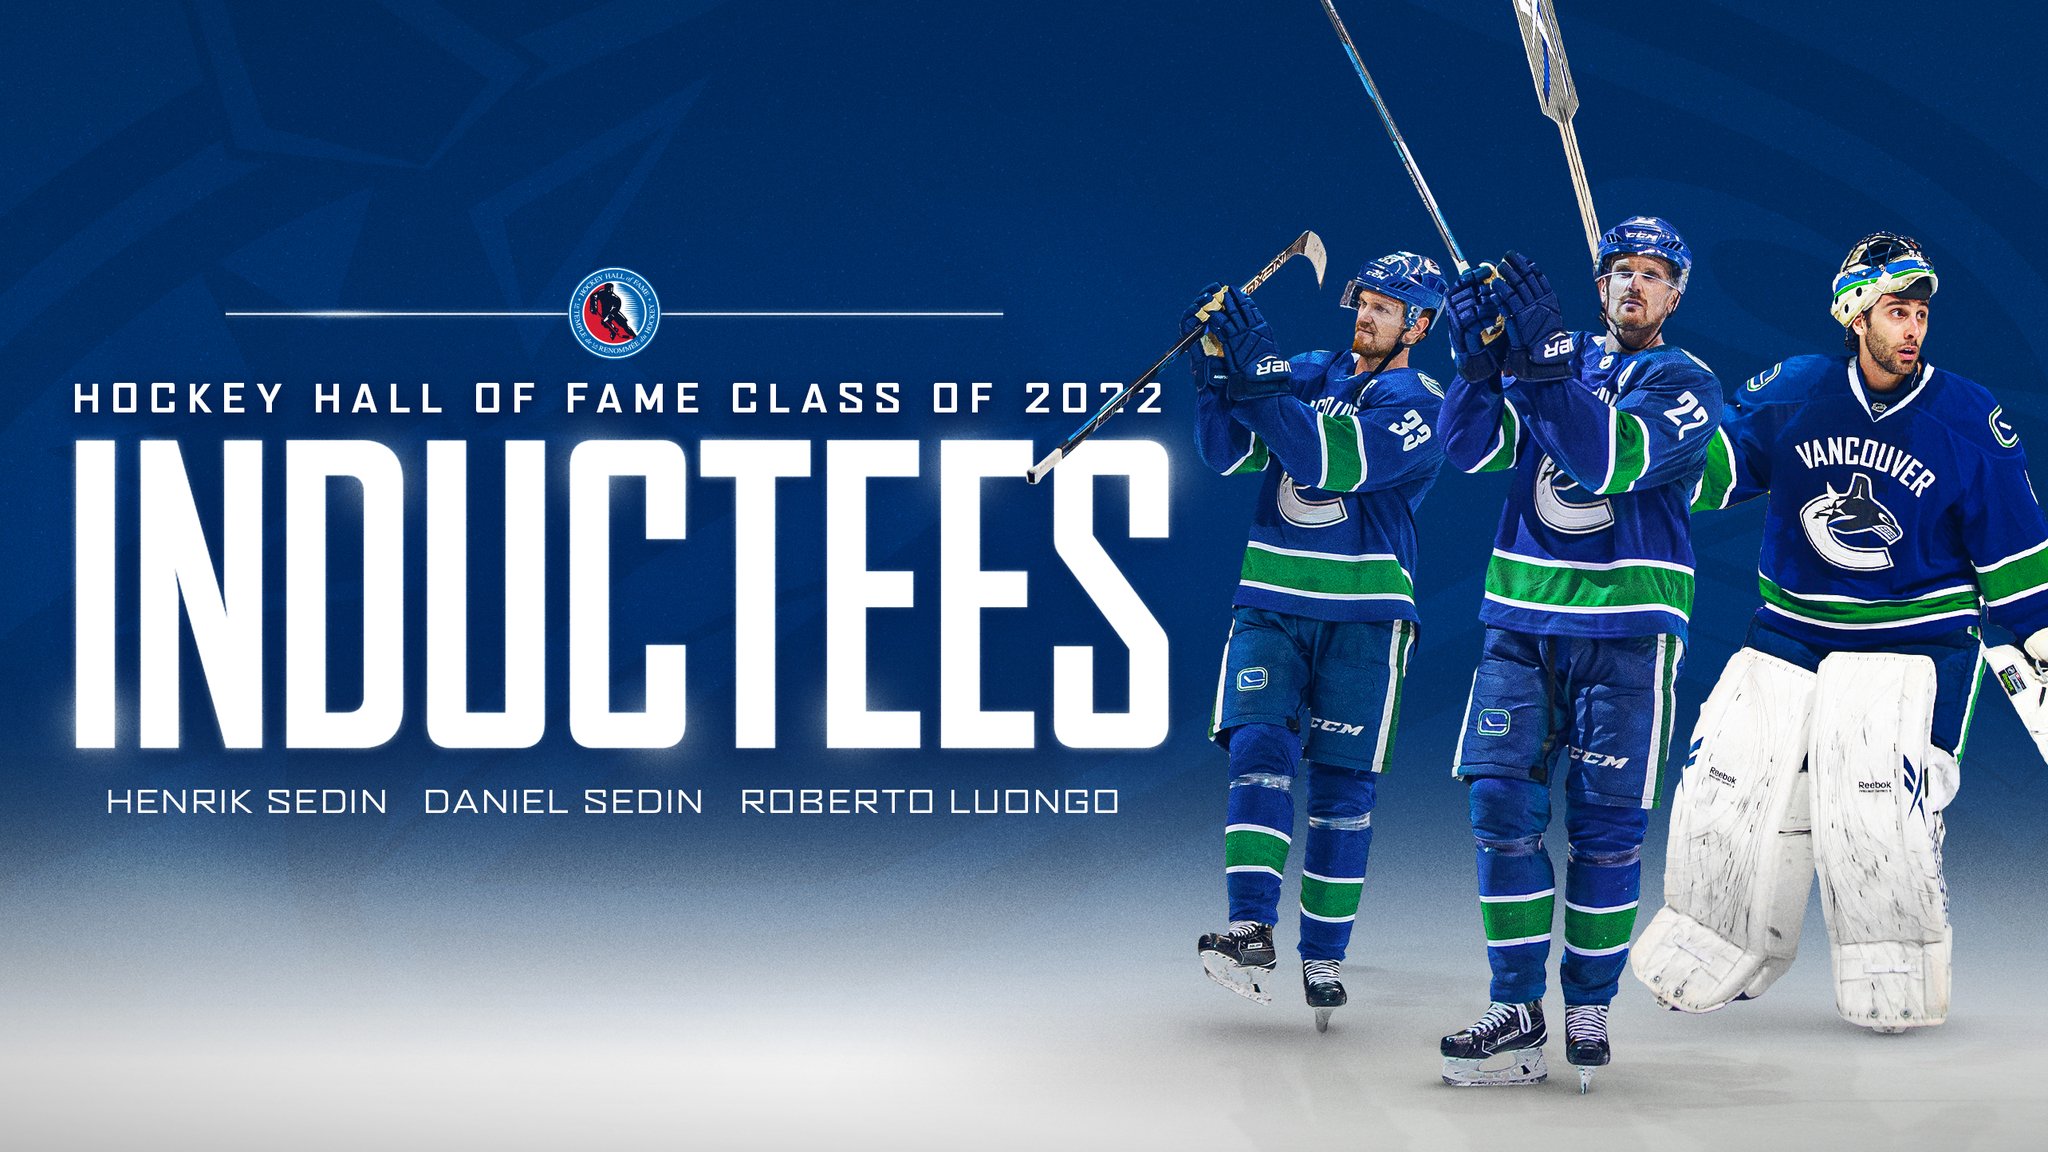 Henrik, Daniel Sedin join former Vancouver Canucks teammate Roberto Luongo  in 2022 induction class for Hockey Hall of Fame - ESPN